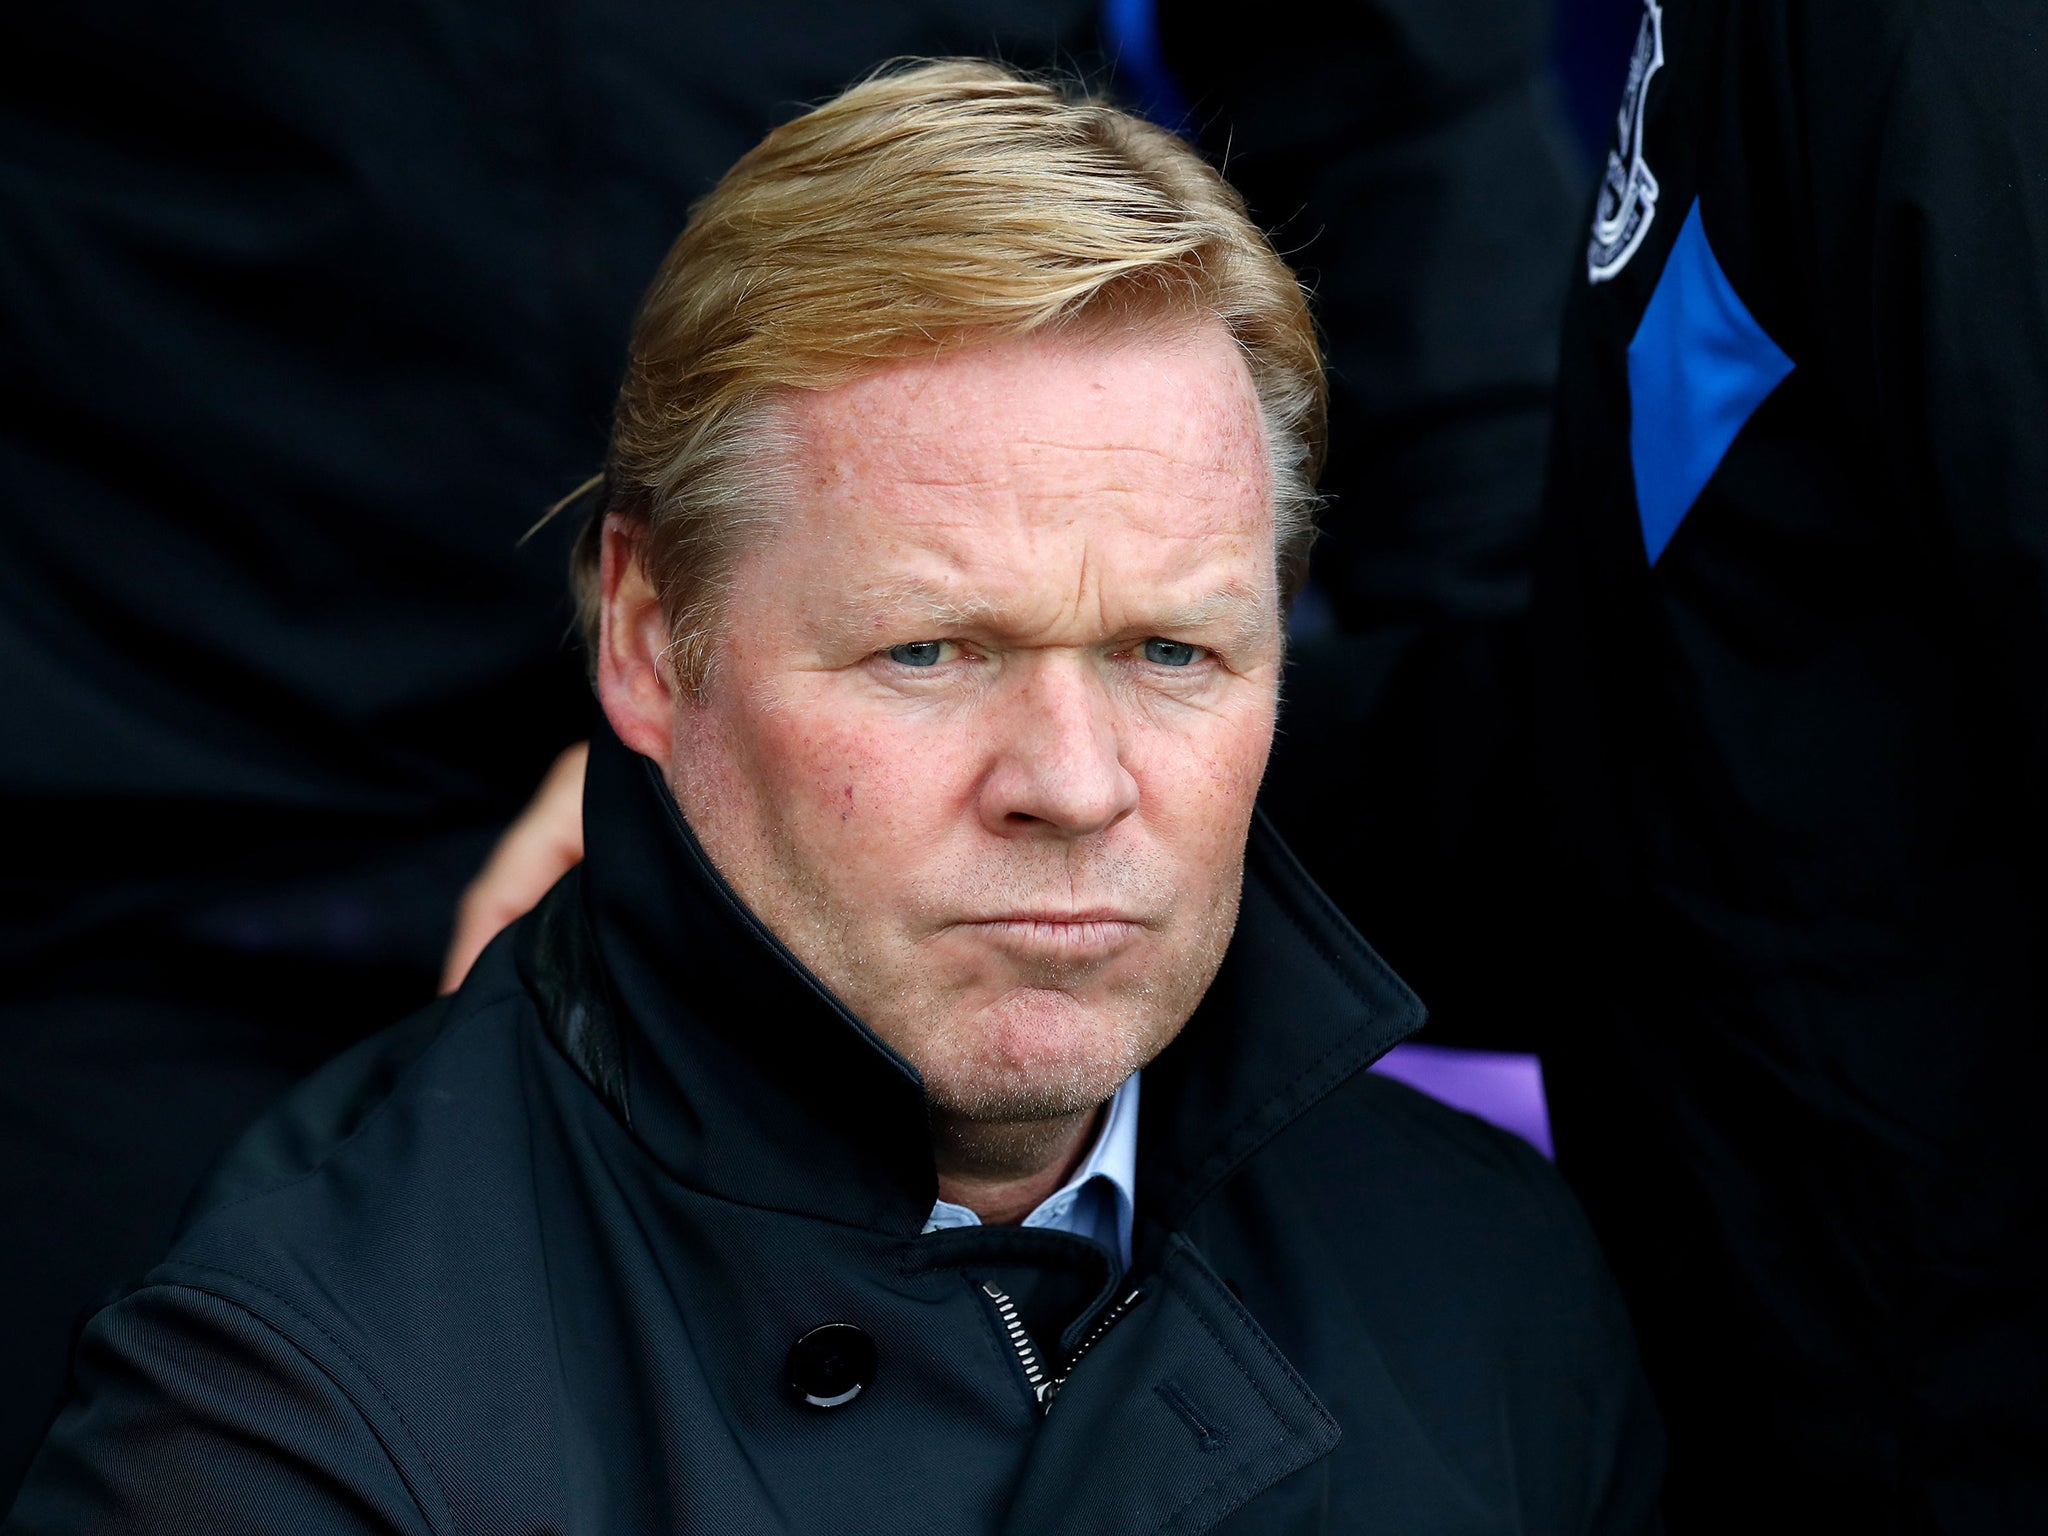 Ronald Koeman believes his players are still committed to him despite the 1-0 defeat by Burnley